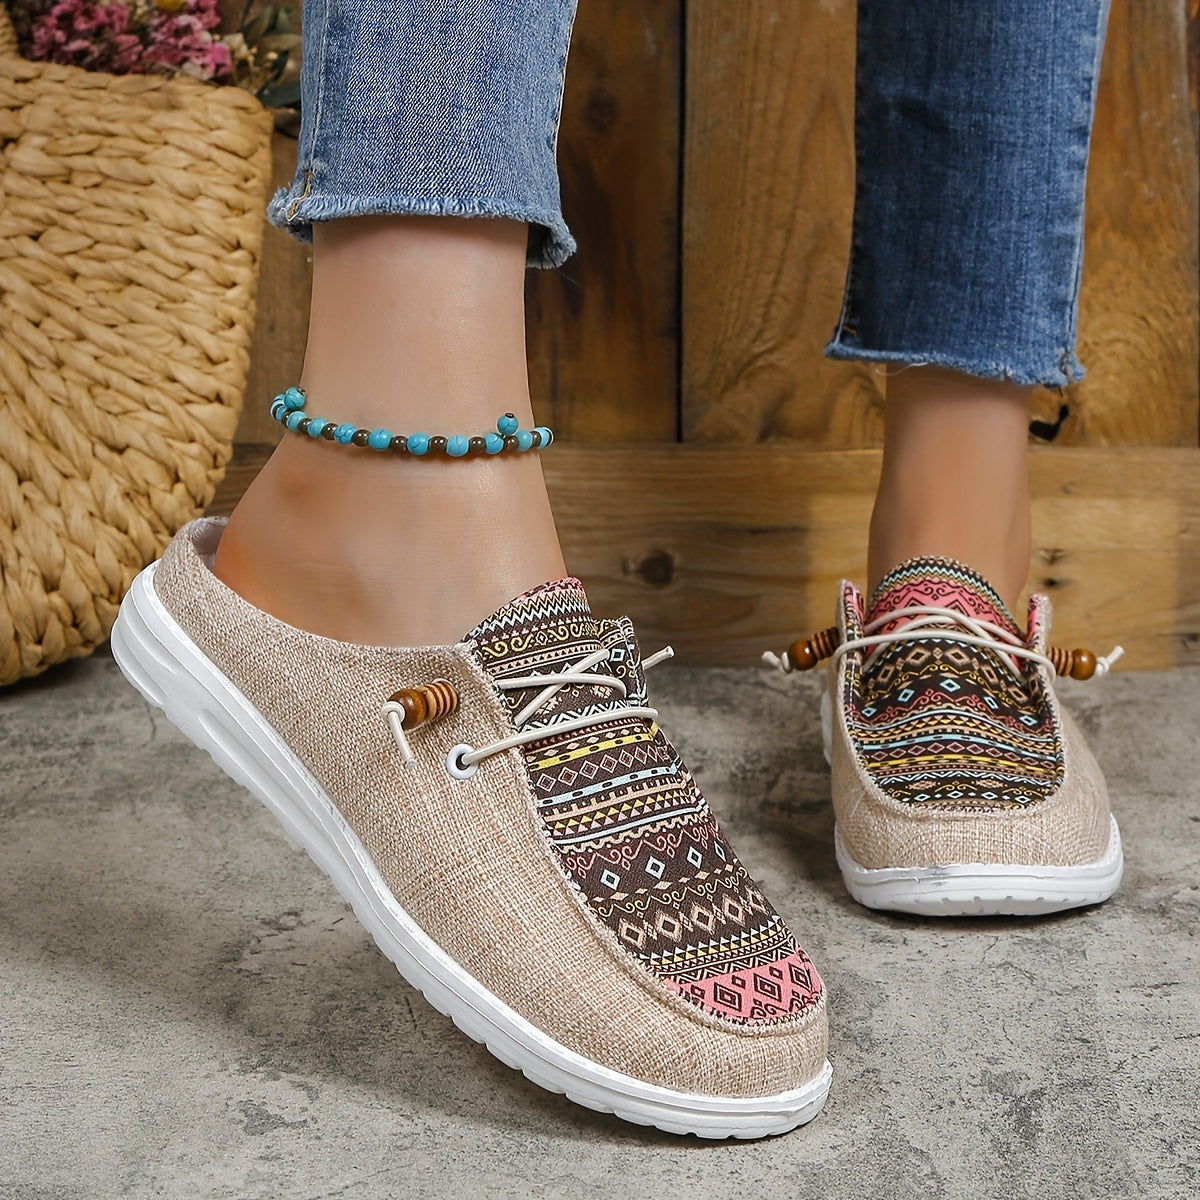 Women's Ethnic Style Canvas Shoes, Lightweight Lace Up Mule Sneakers, Lightweight & Comfortable Shoes